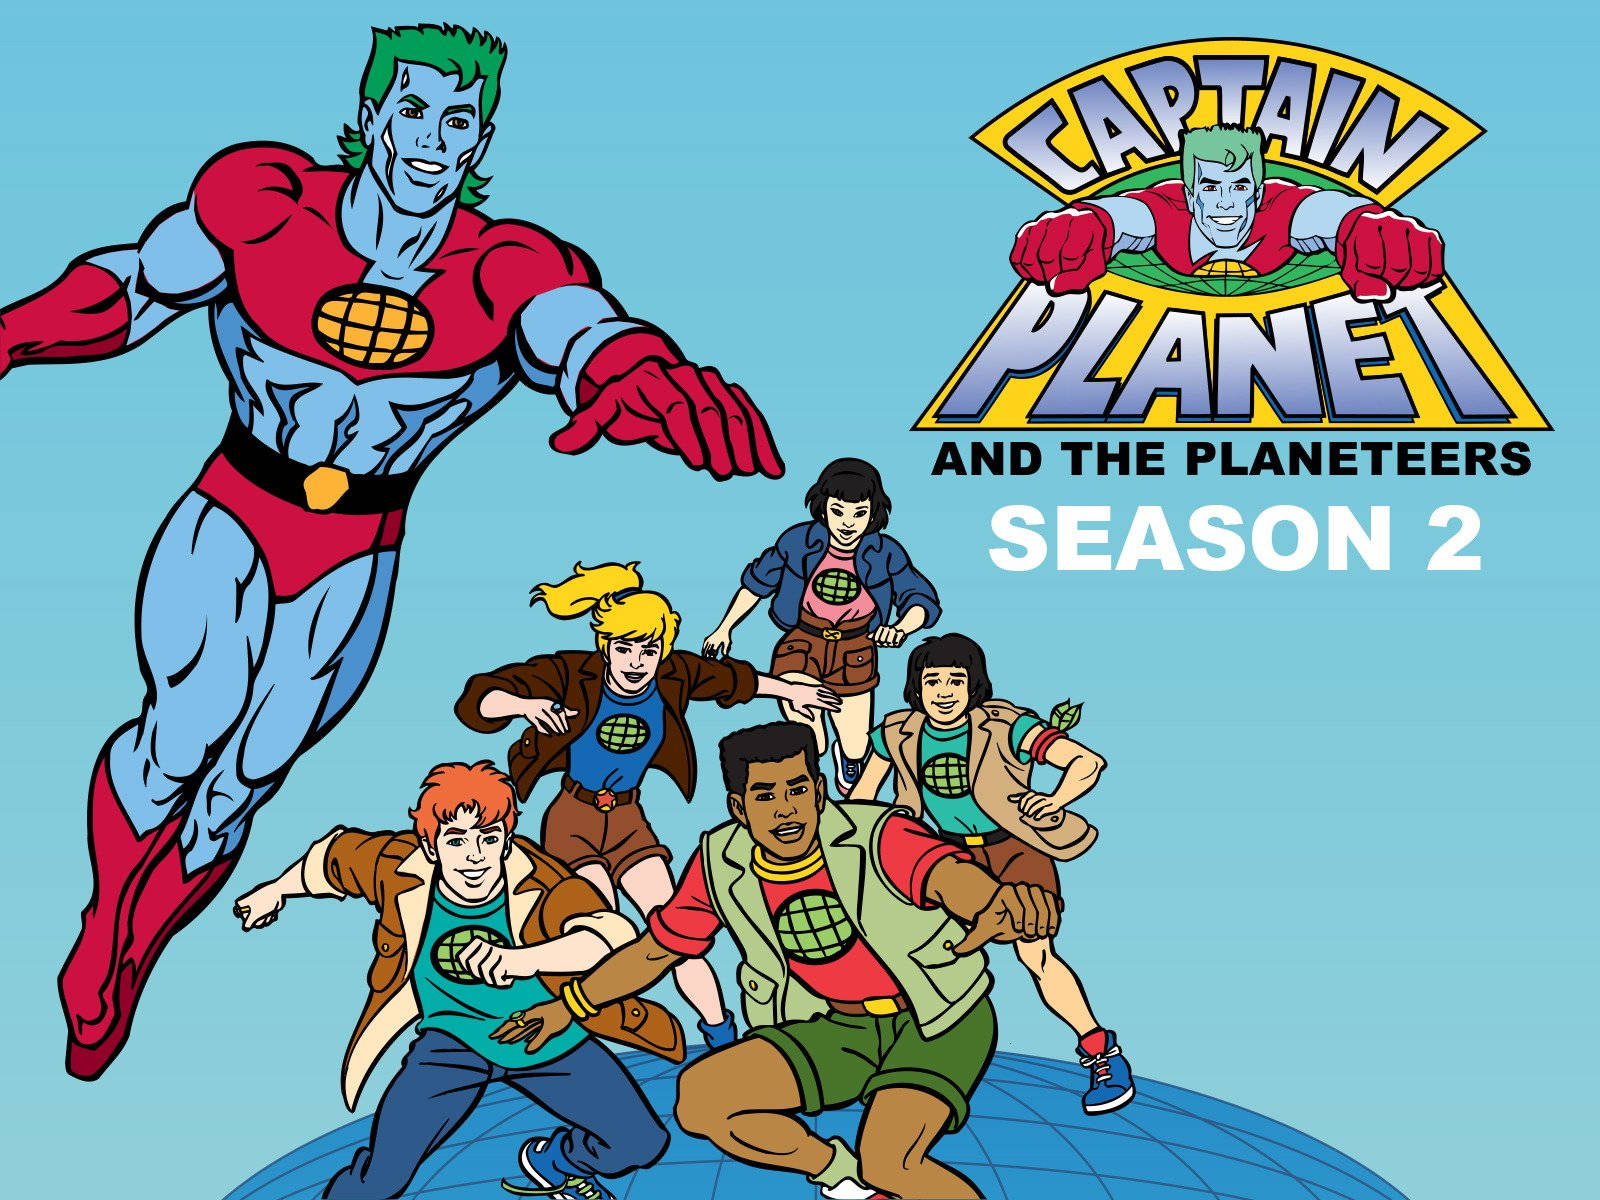 Captain Planet And The Planeteers Season 2 Wallpaper